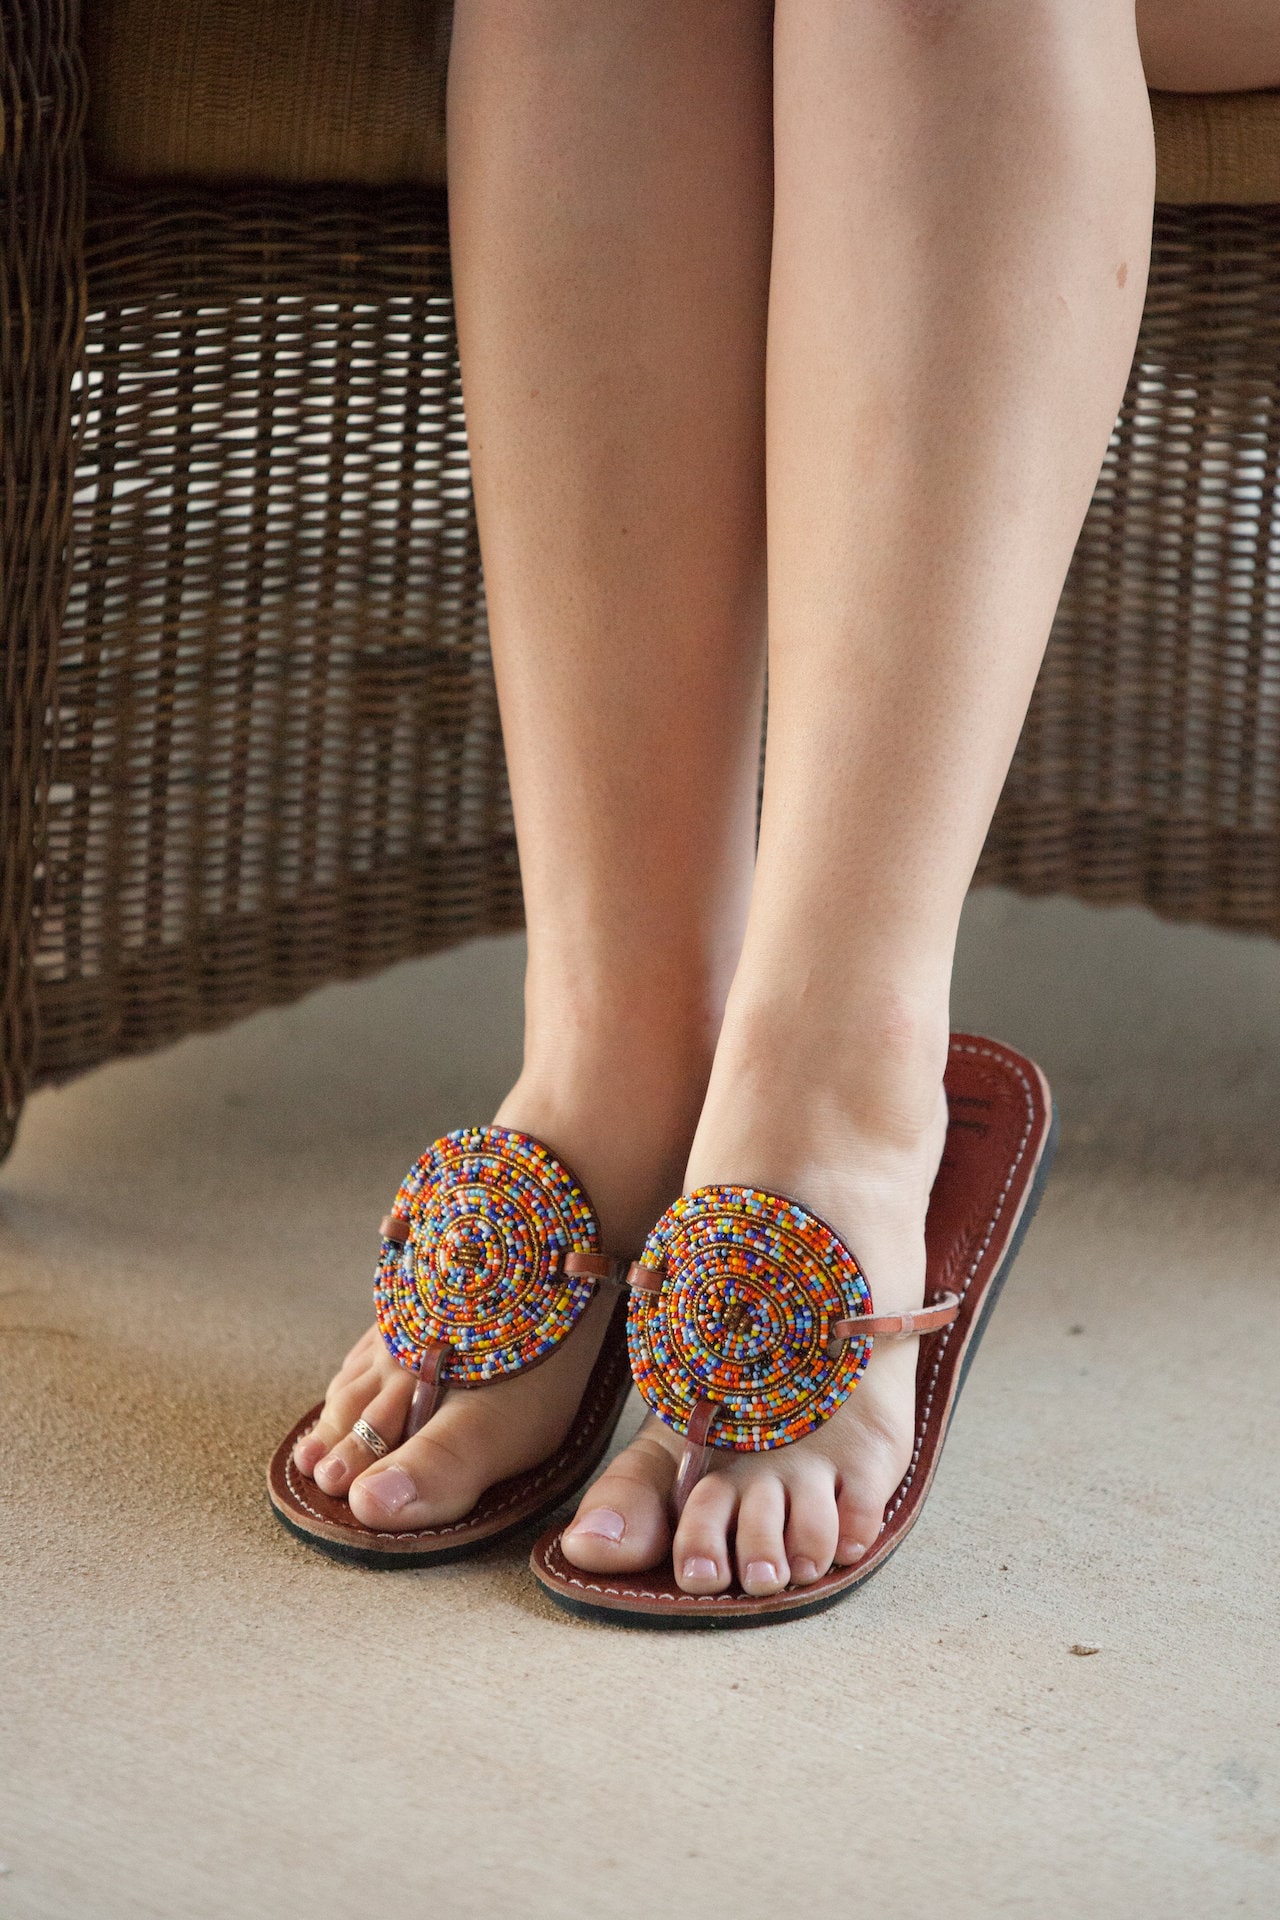 Amazon.com: Women's Flip Flops, Hippie Boho Colorful Beaded Sandals, Size  5-12 US, Vegan Handmade Shoes by Tribes : עבודת יד